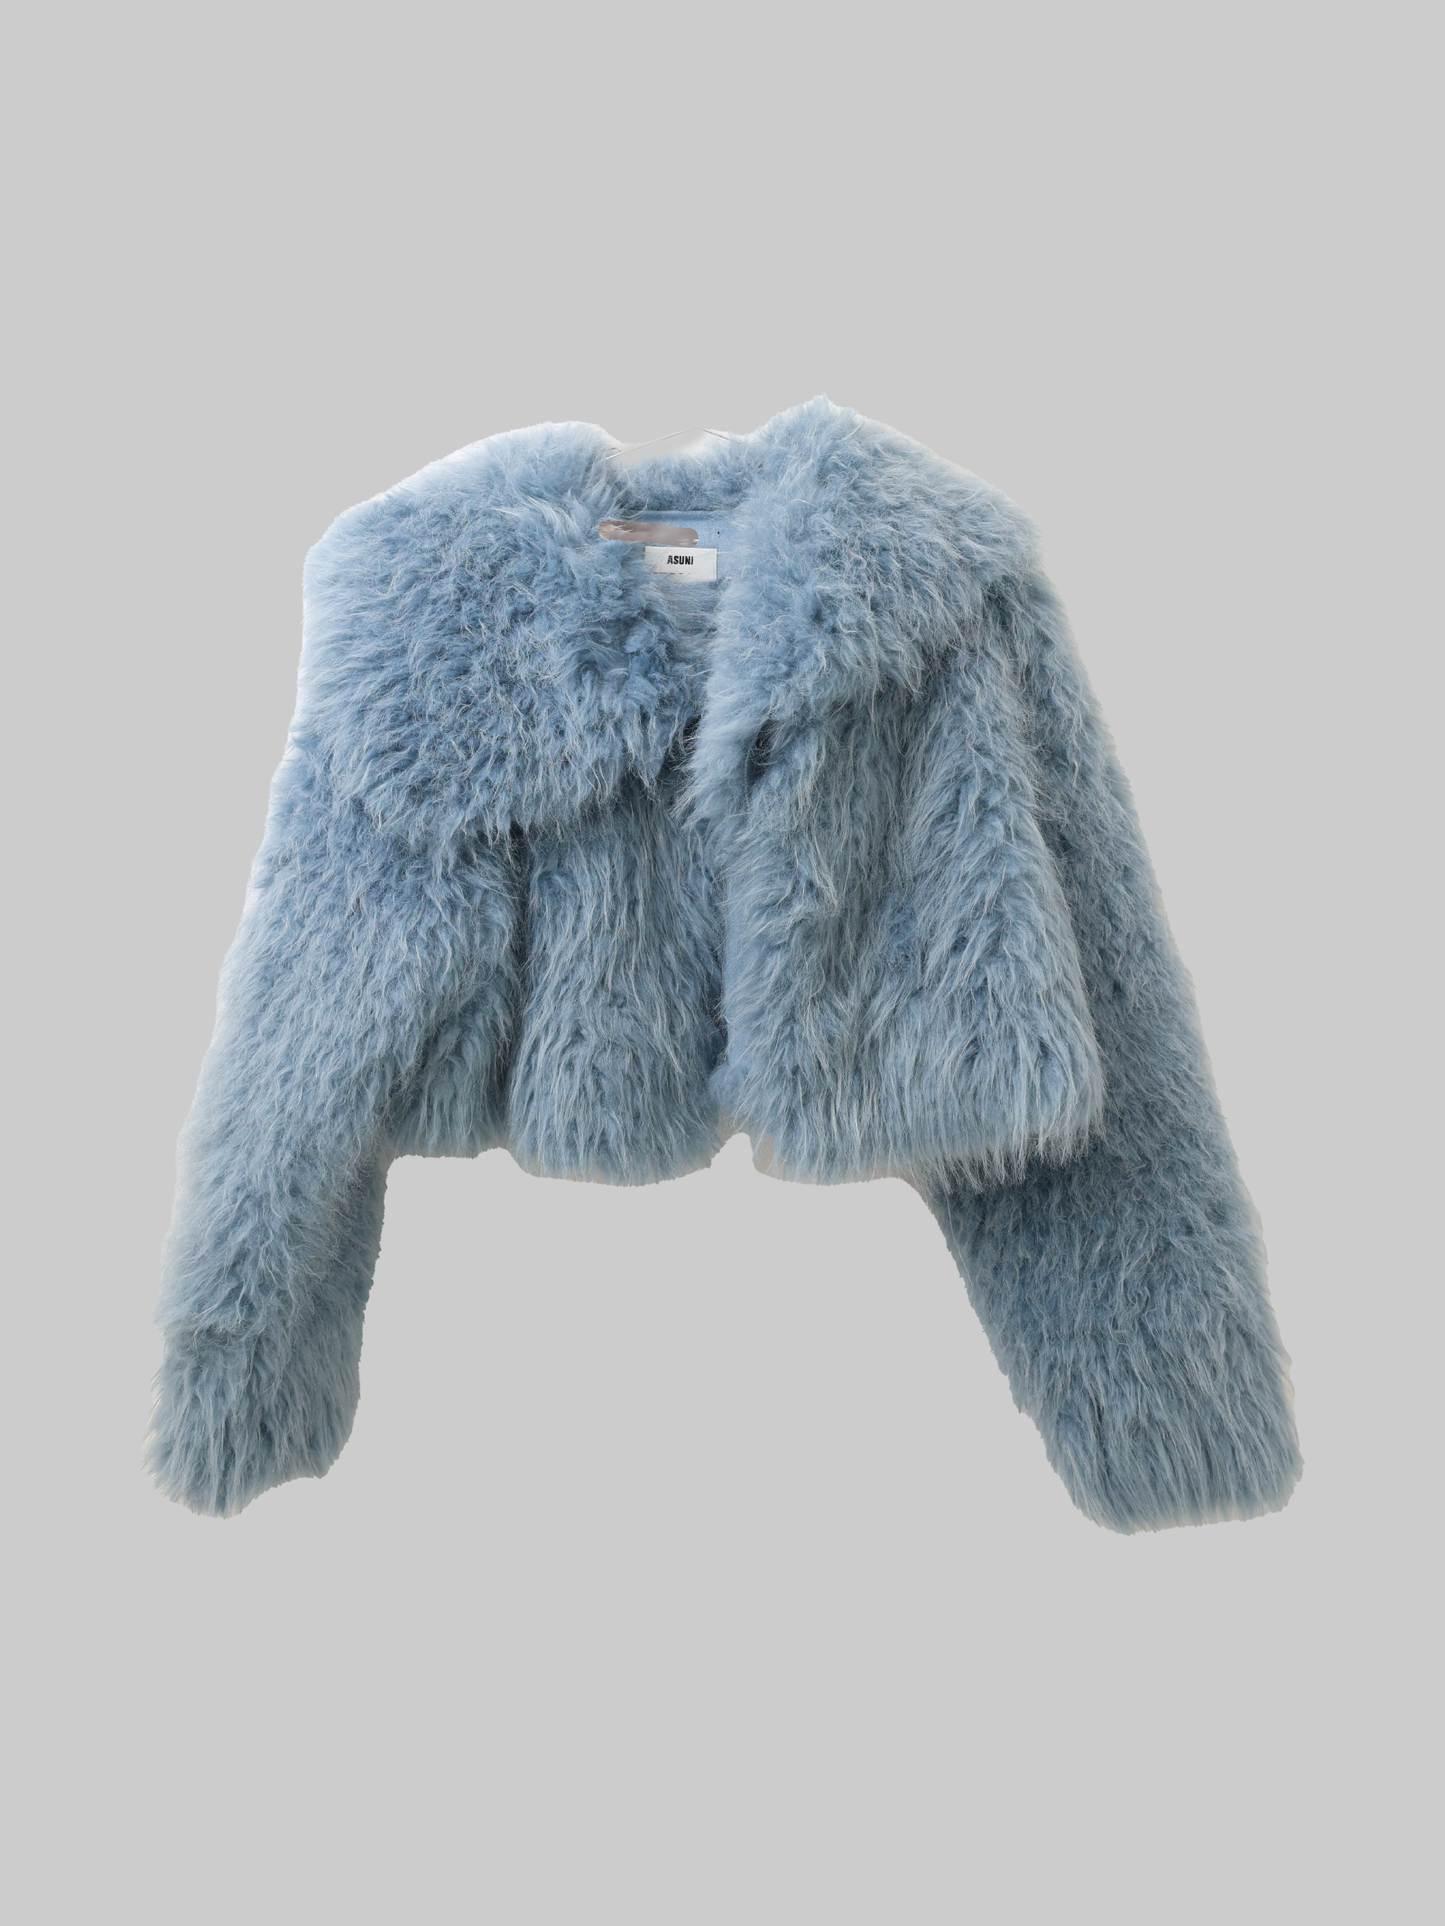 asuni Faux Fur Collar Evening Cape for party Coat in blue